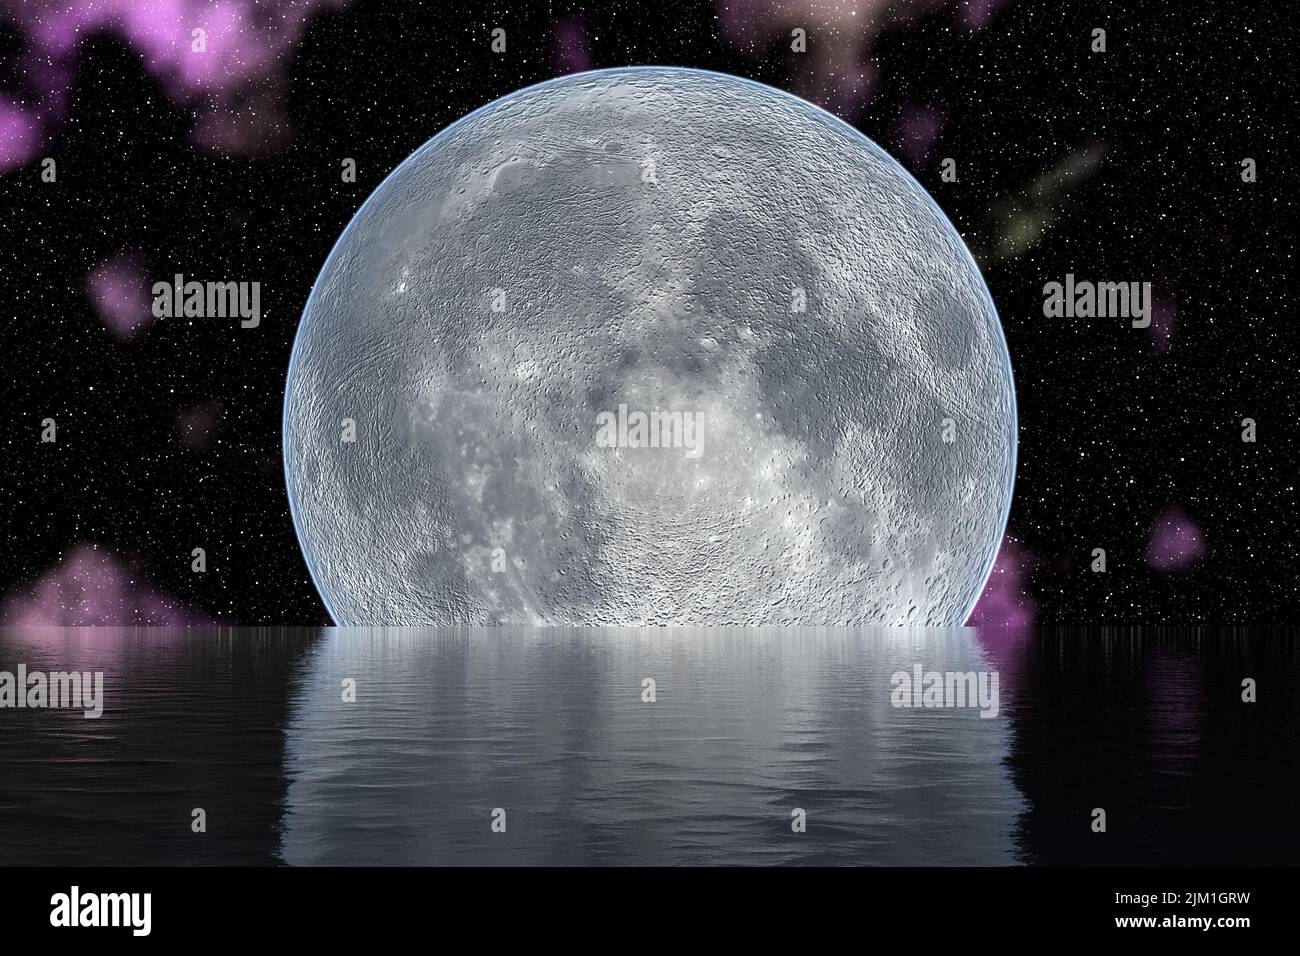 Moon in front of deep space with water reflection. No NASA images. Stock Photo